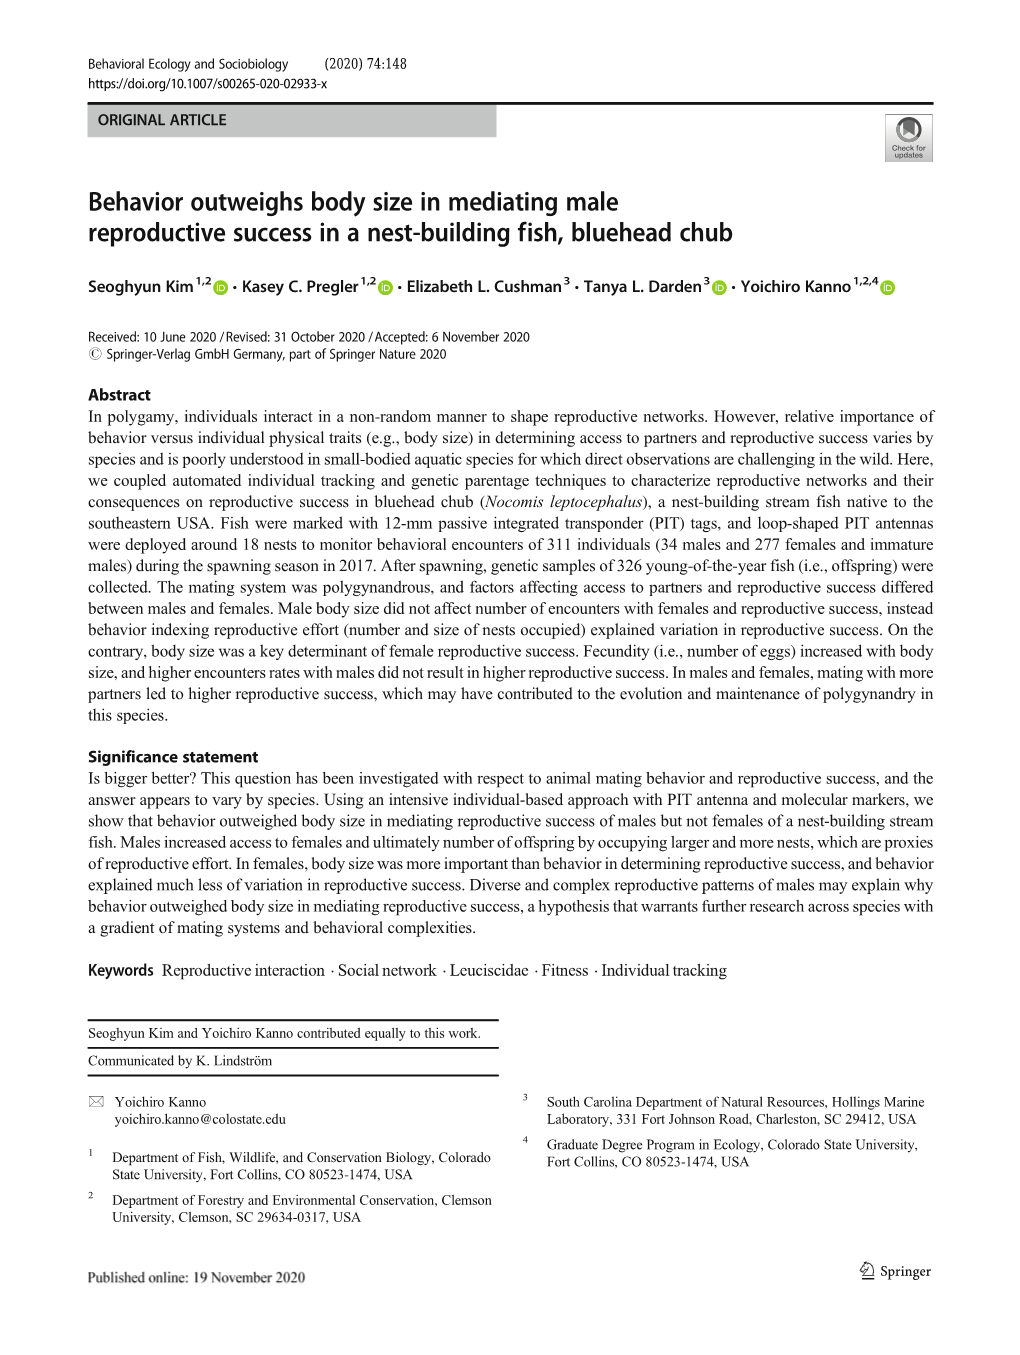 Behavior Outweighs Body Size in Mediating Male Reproductive Success in a Nest-Building Fish, Bluehead Chub